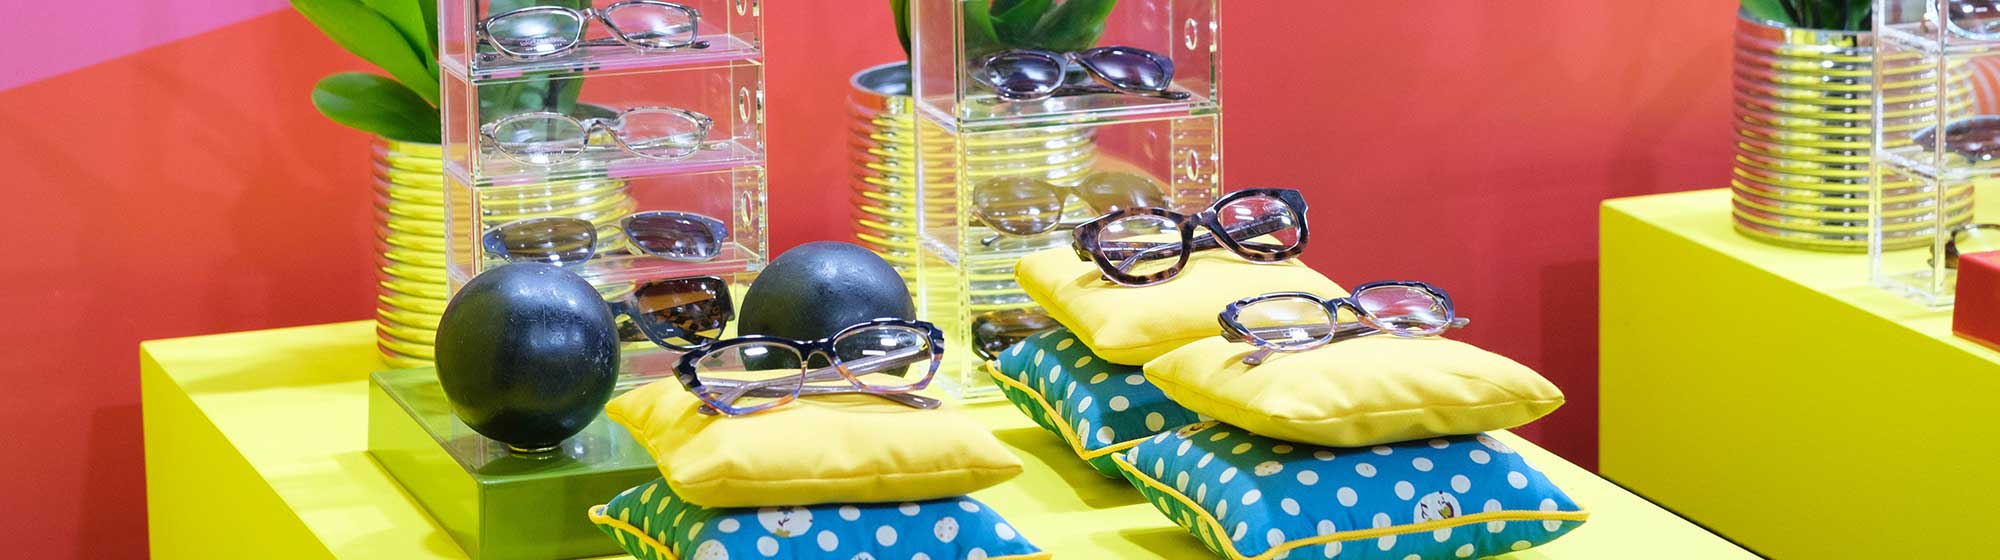 Glasses on small cushions